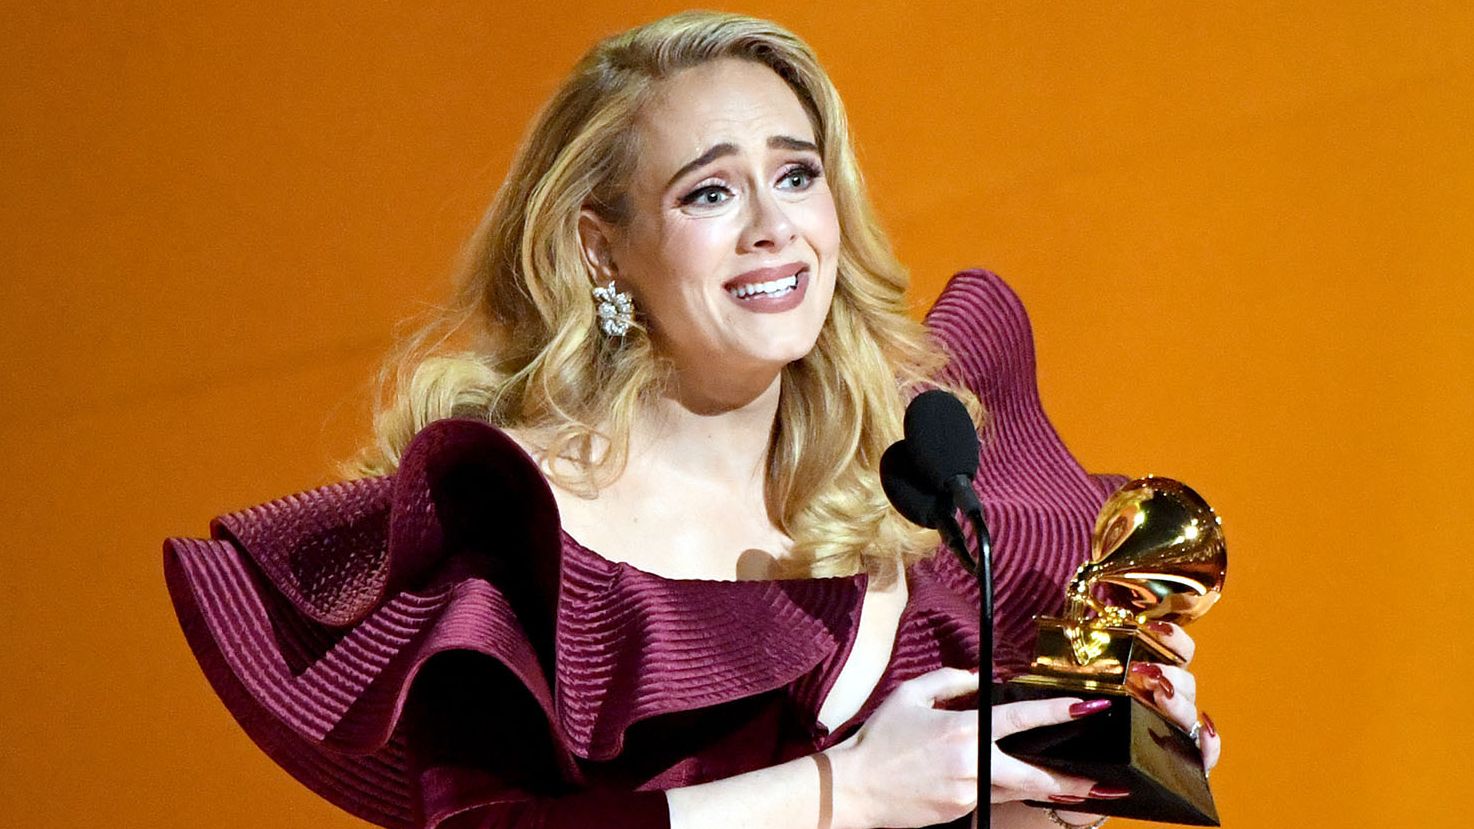 Adele to host Saturday Night Live for first time on Oct. 24